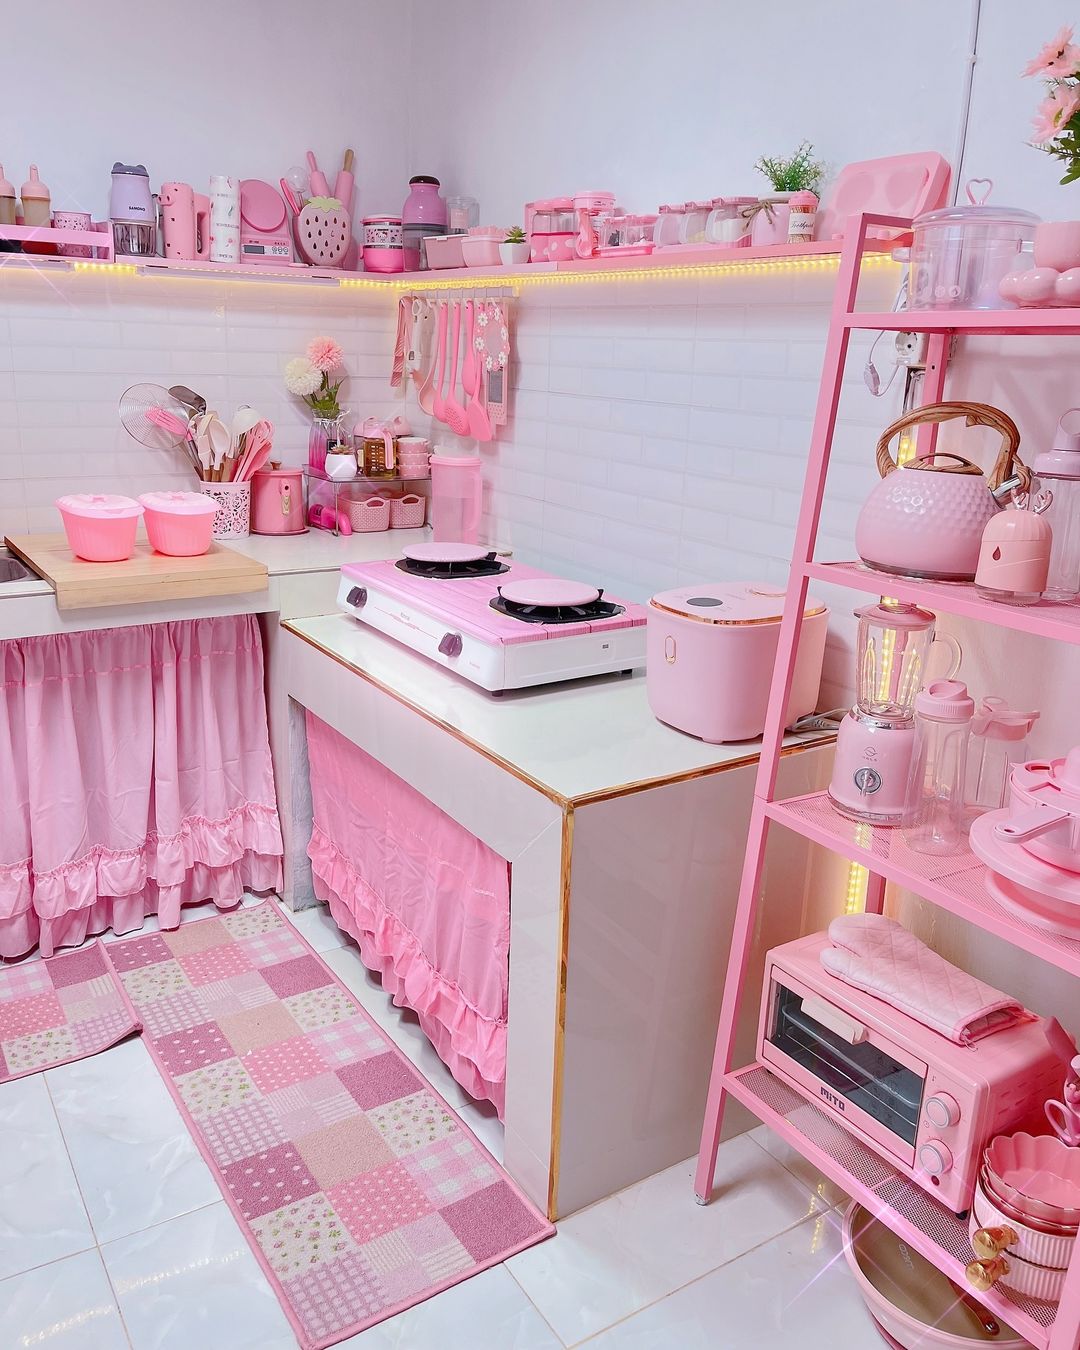 Romantic Retro Revival Kitchen With Pink Accents